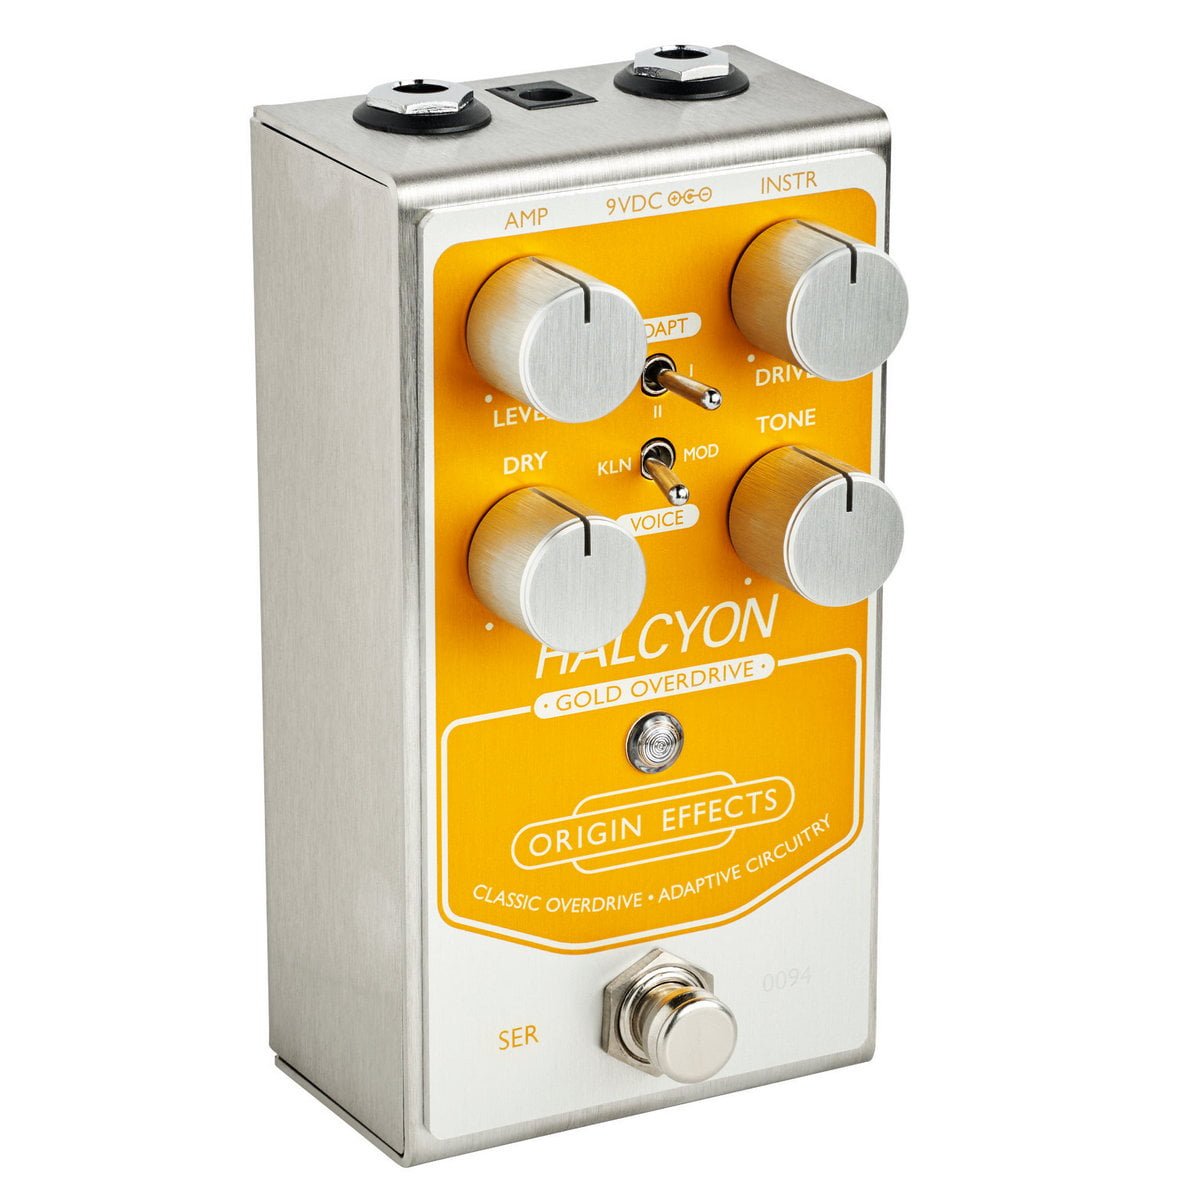 Origin Effects Halcyon Gold Overdrive Angle 1 (web)